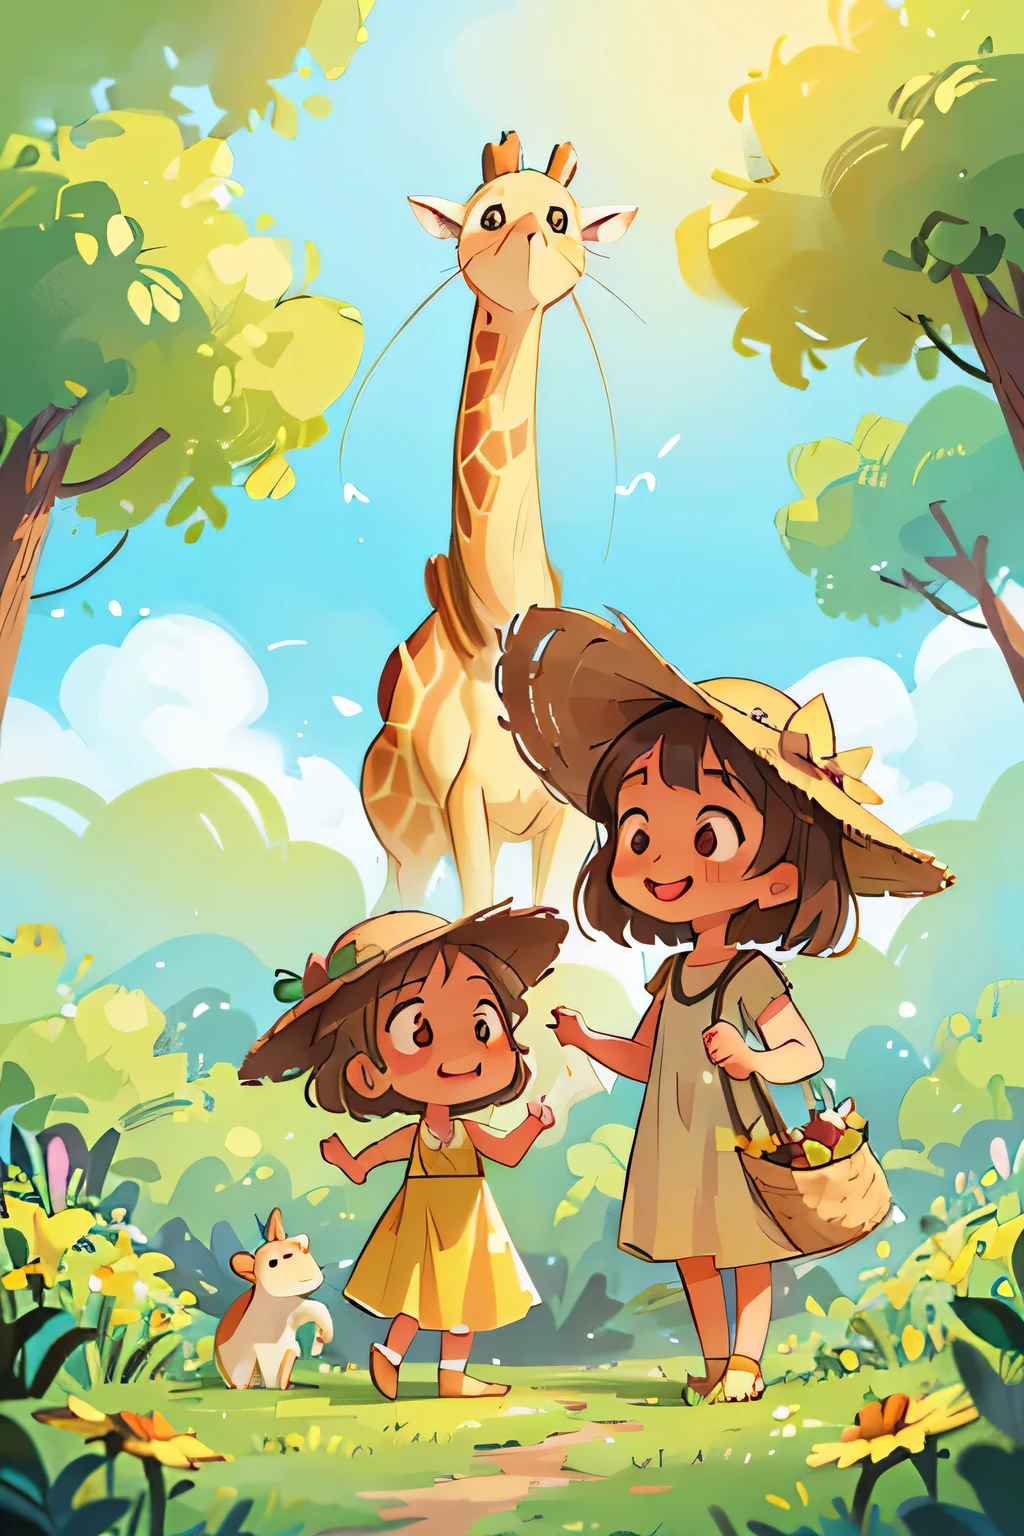 Two elegant sisters, their radiant smiles beaming, pose gracefully next to a majestic giraffe in a serene savannah setting. The older sister, with wavy chestnut curls cascading down her shoulders, wears a chic sun hat and a flowing blue maxi dress. Her younger sister, with silky straight blonde hair, complements her outfit with a sunny yellow sundress and matching sun hat. The giraffe, with its long neck stretching towards the siblings, gazes down at them with gentle curiosity, its large brown eyes twinkling with intelligence. The sisters' laughter rings in the air as they snap photo after photo, their joyful energy evident in each captured